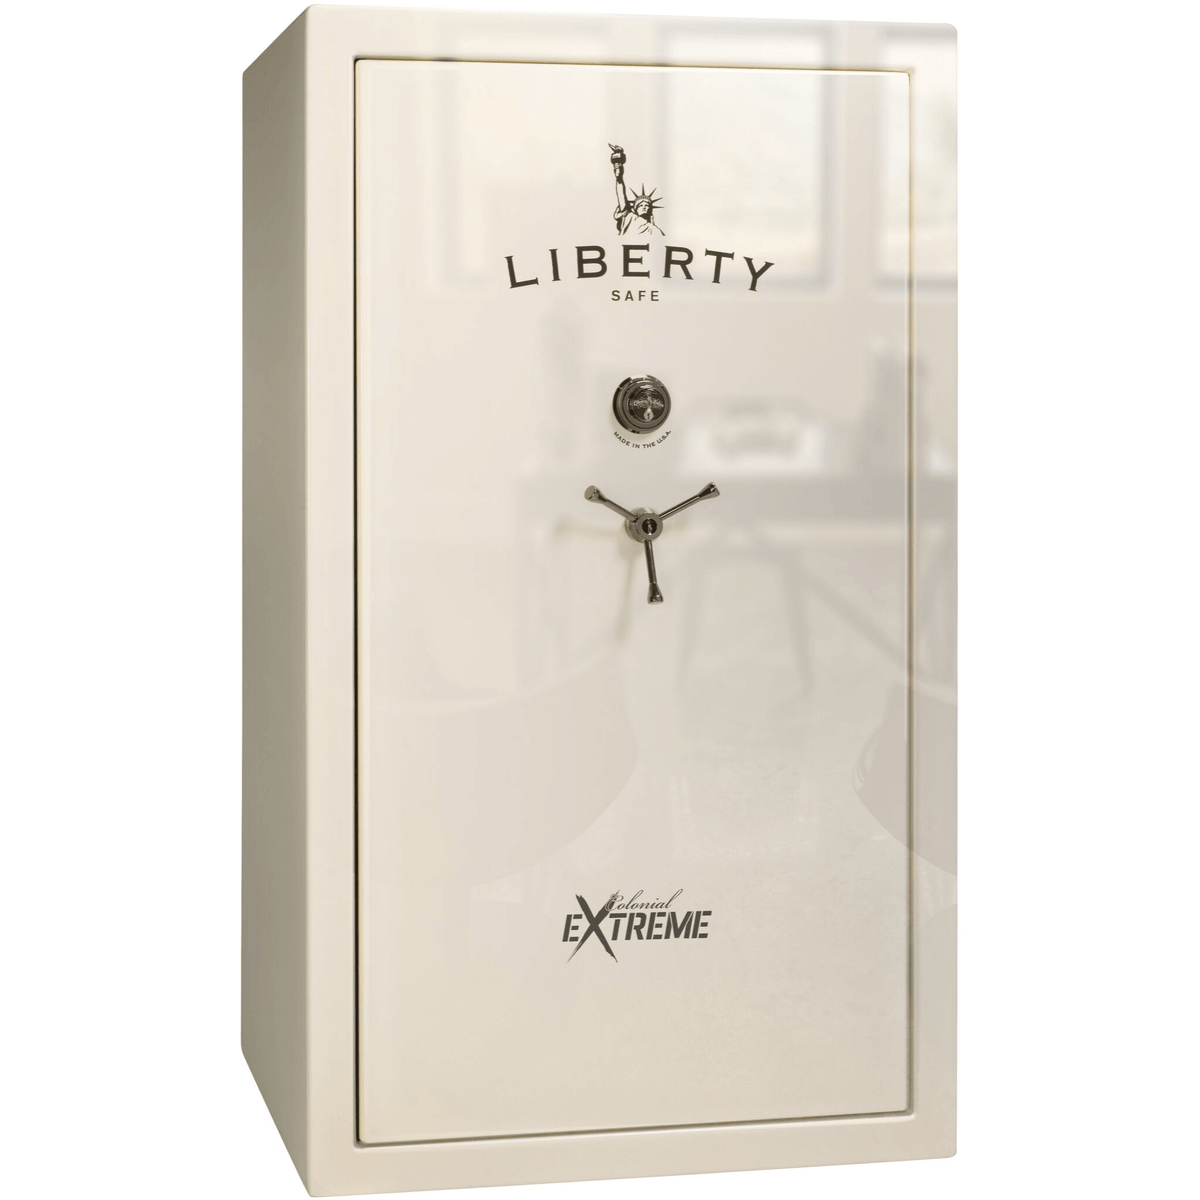 Liberty Colonial 50 Extreme Safe in White Gloss with Black Chrome Mechanical Lock.